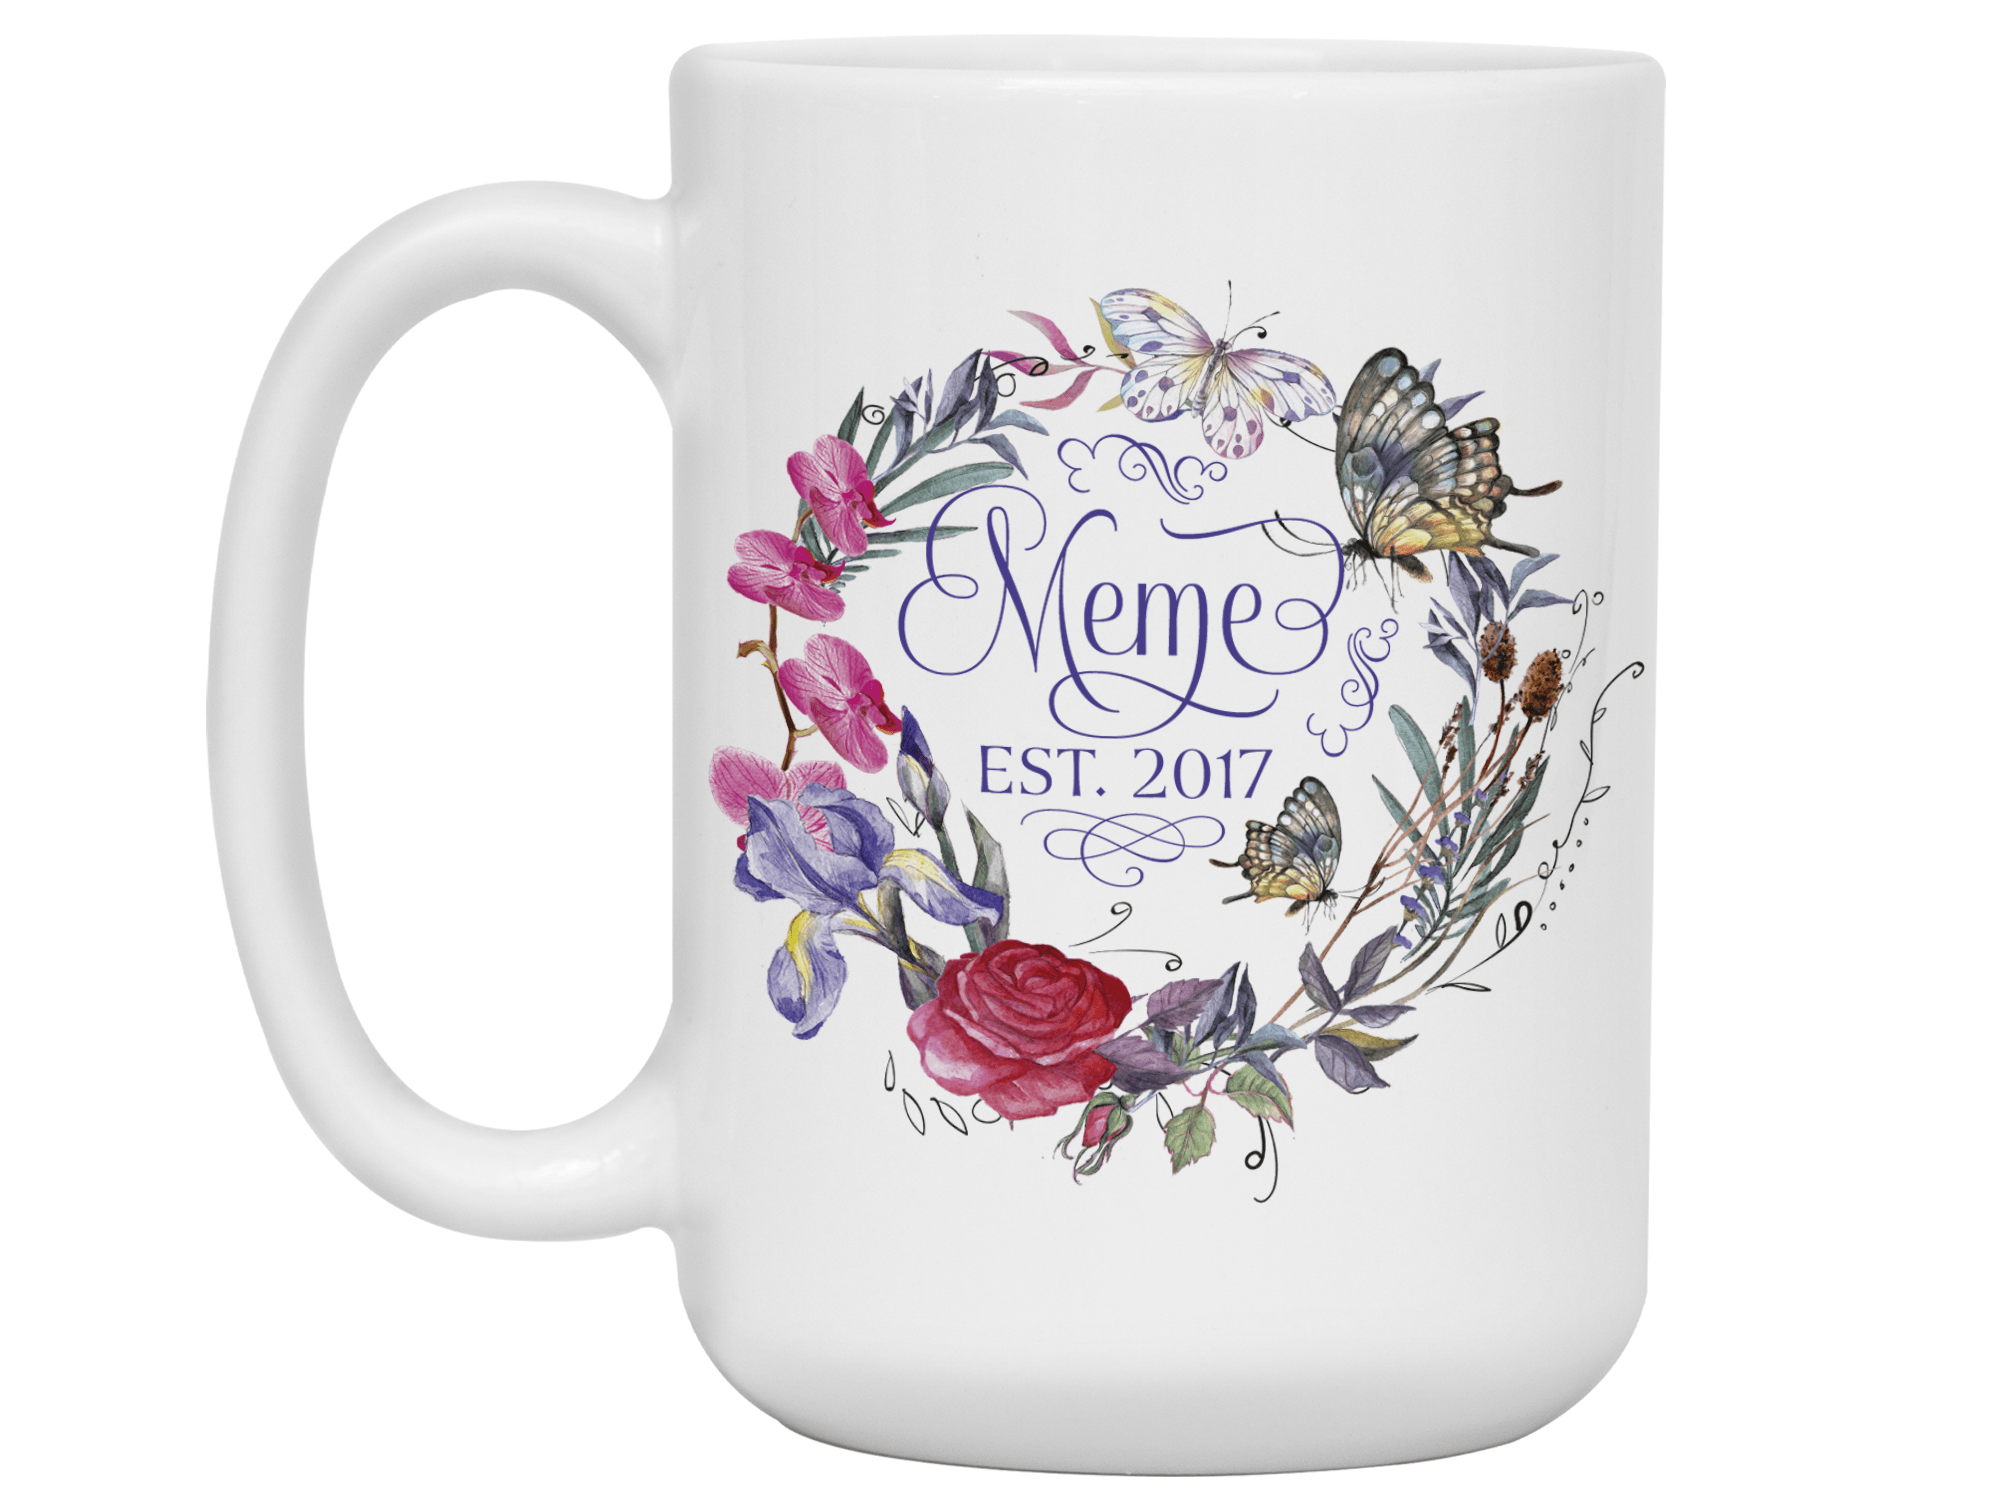 Custom Mugs with Pictures | Personalized Bone China Mugs